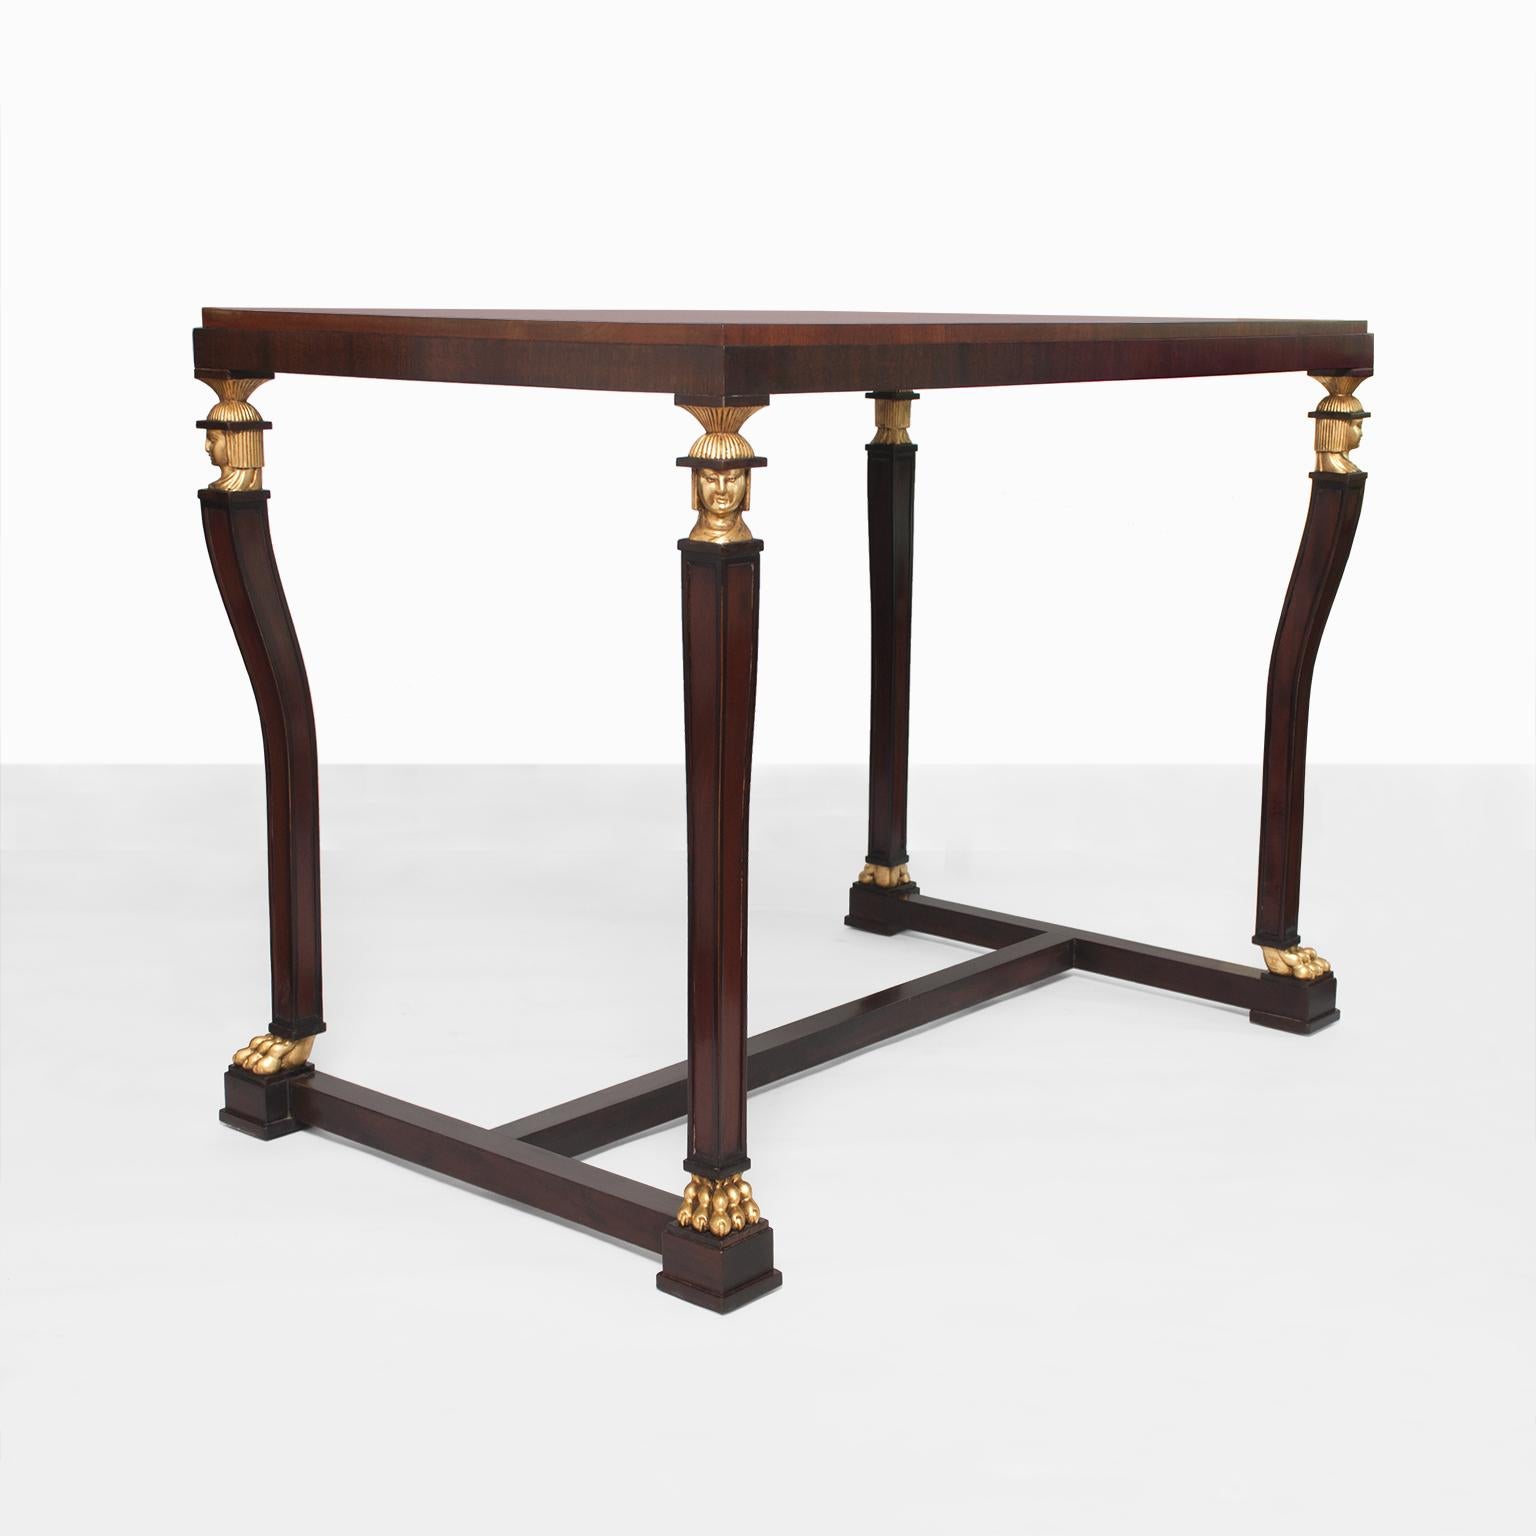 A stunning Scandinavian Modern, Swedish grace period (1920s) solid mahogany console or centre table with carved and parcel-gilt caryatid heads and claw feet. The top is veneered with Cuban flame mahogany. Exceptional quality, fully